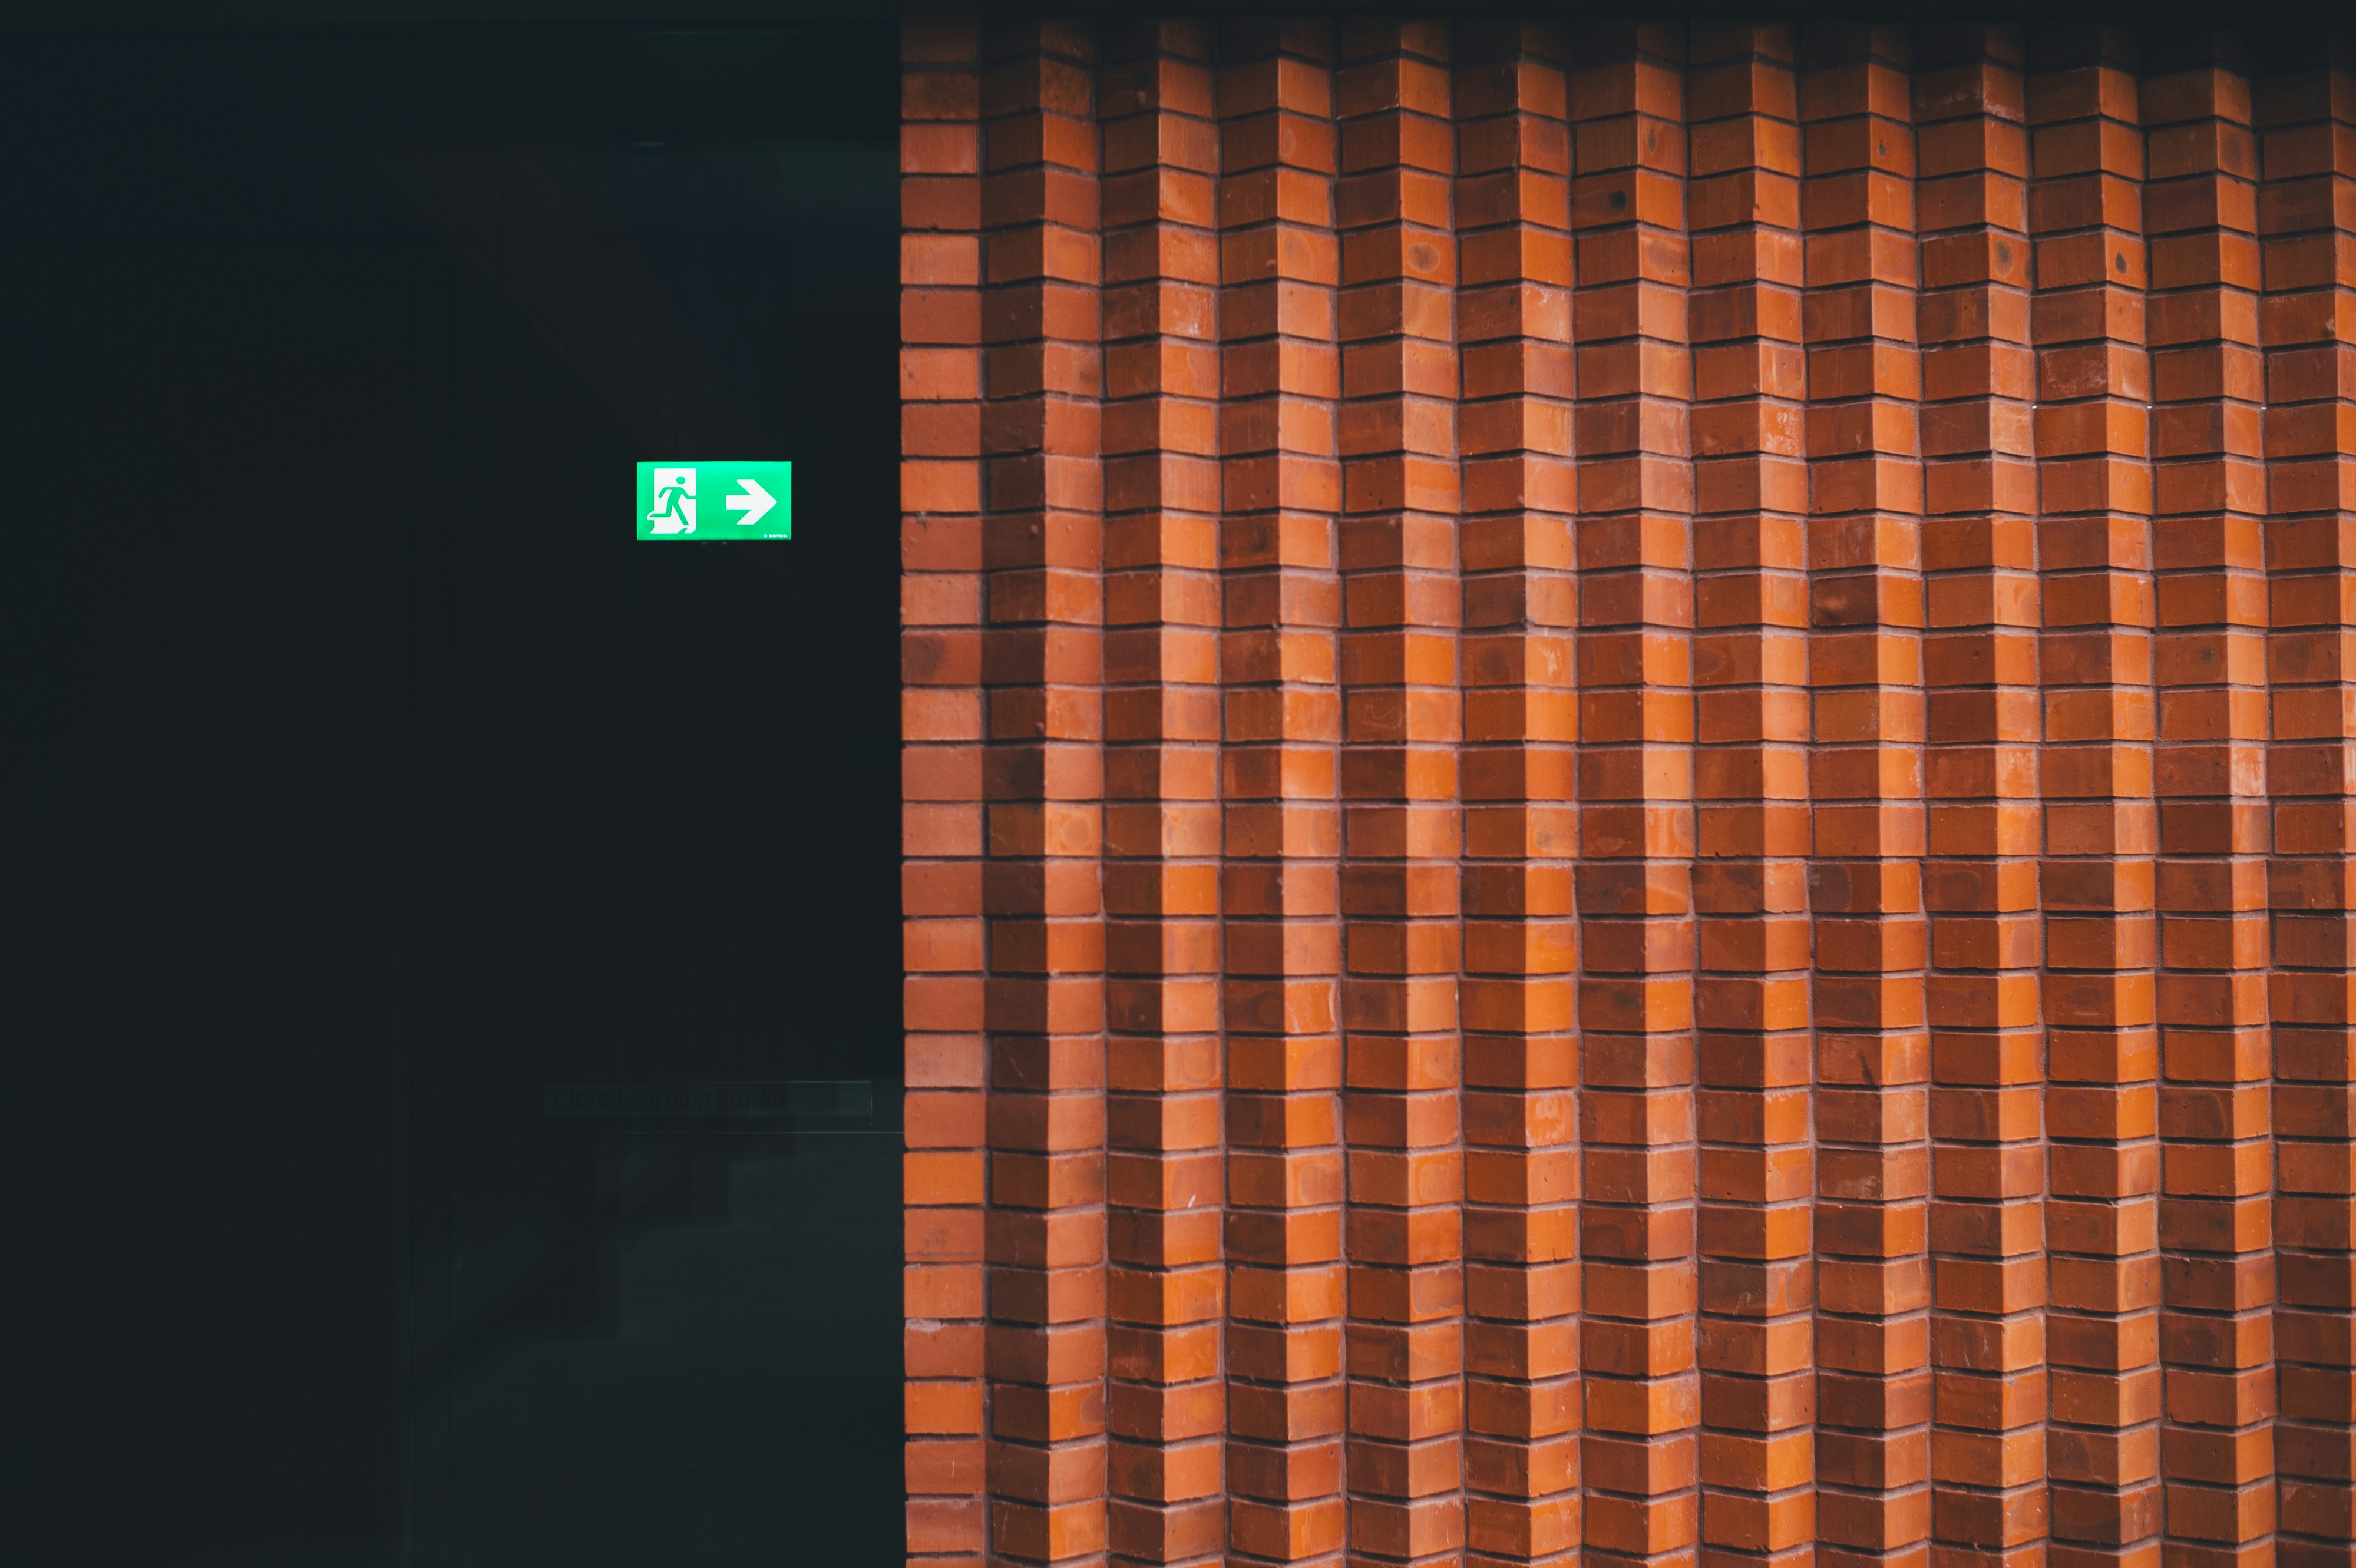 Exit sign next to brick wall